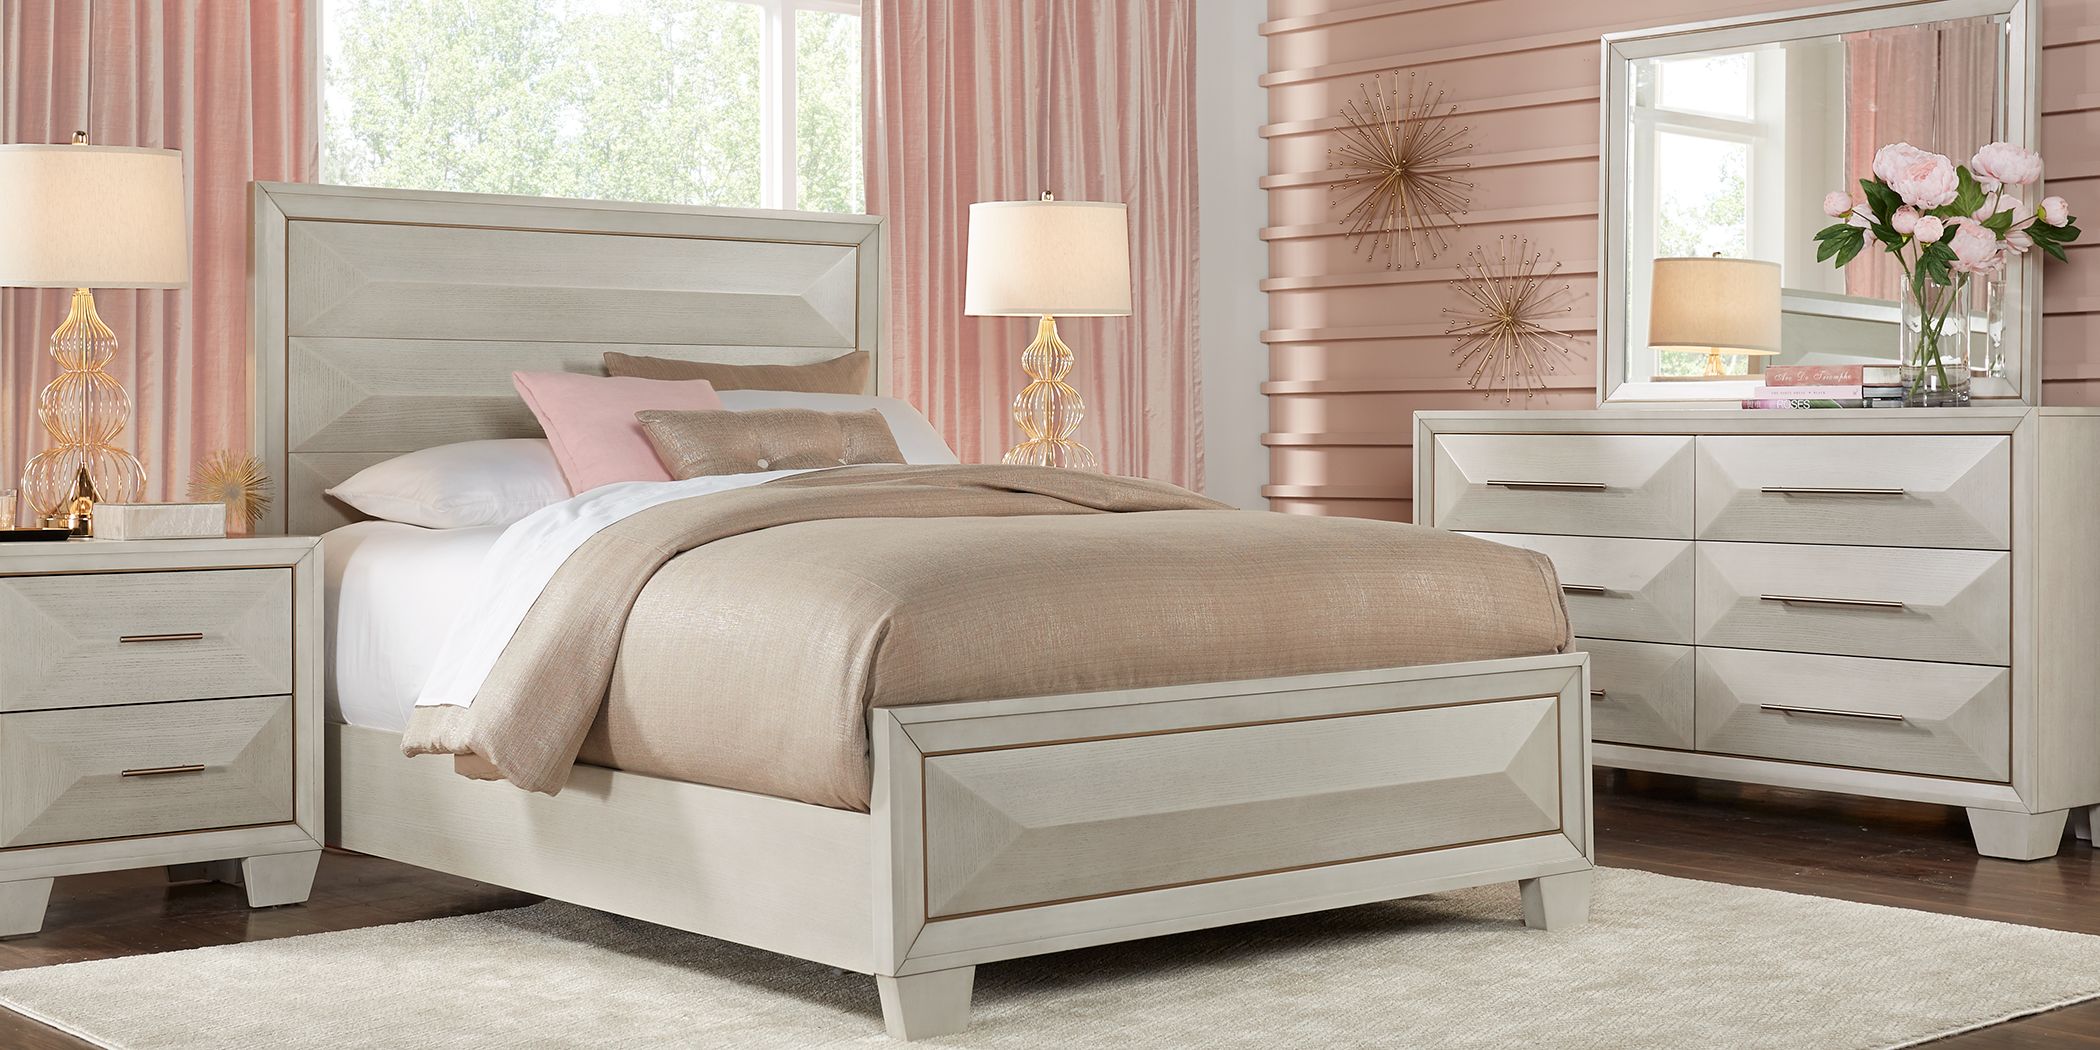 rooms to go kids princess bed